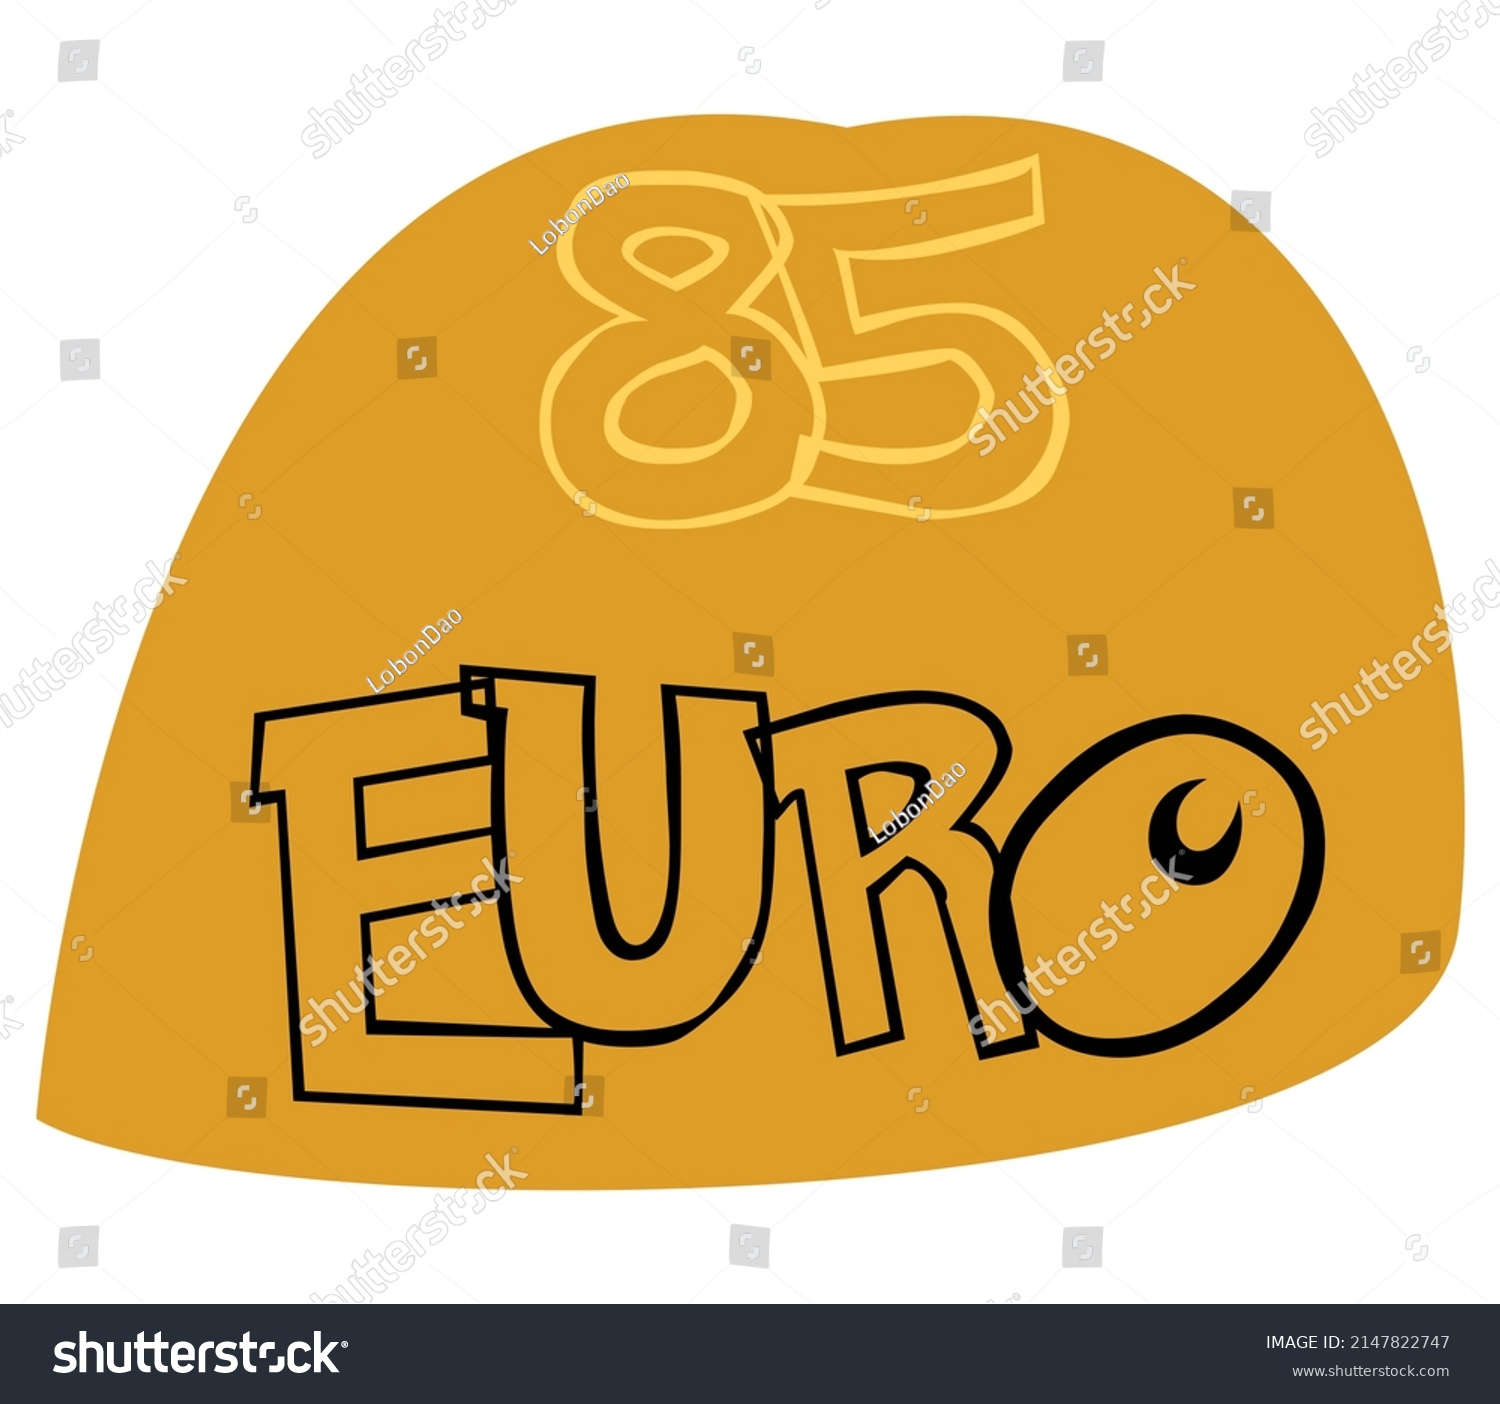 85Euro Symbol in a button mode, 2d vector illustration #2147822747